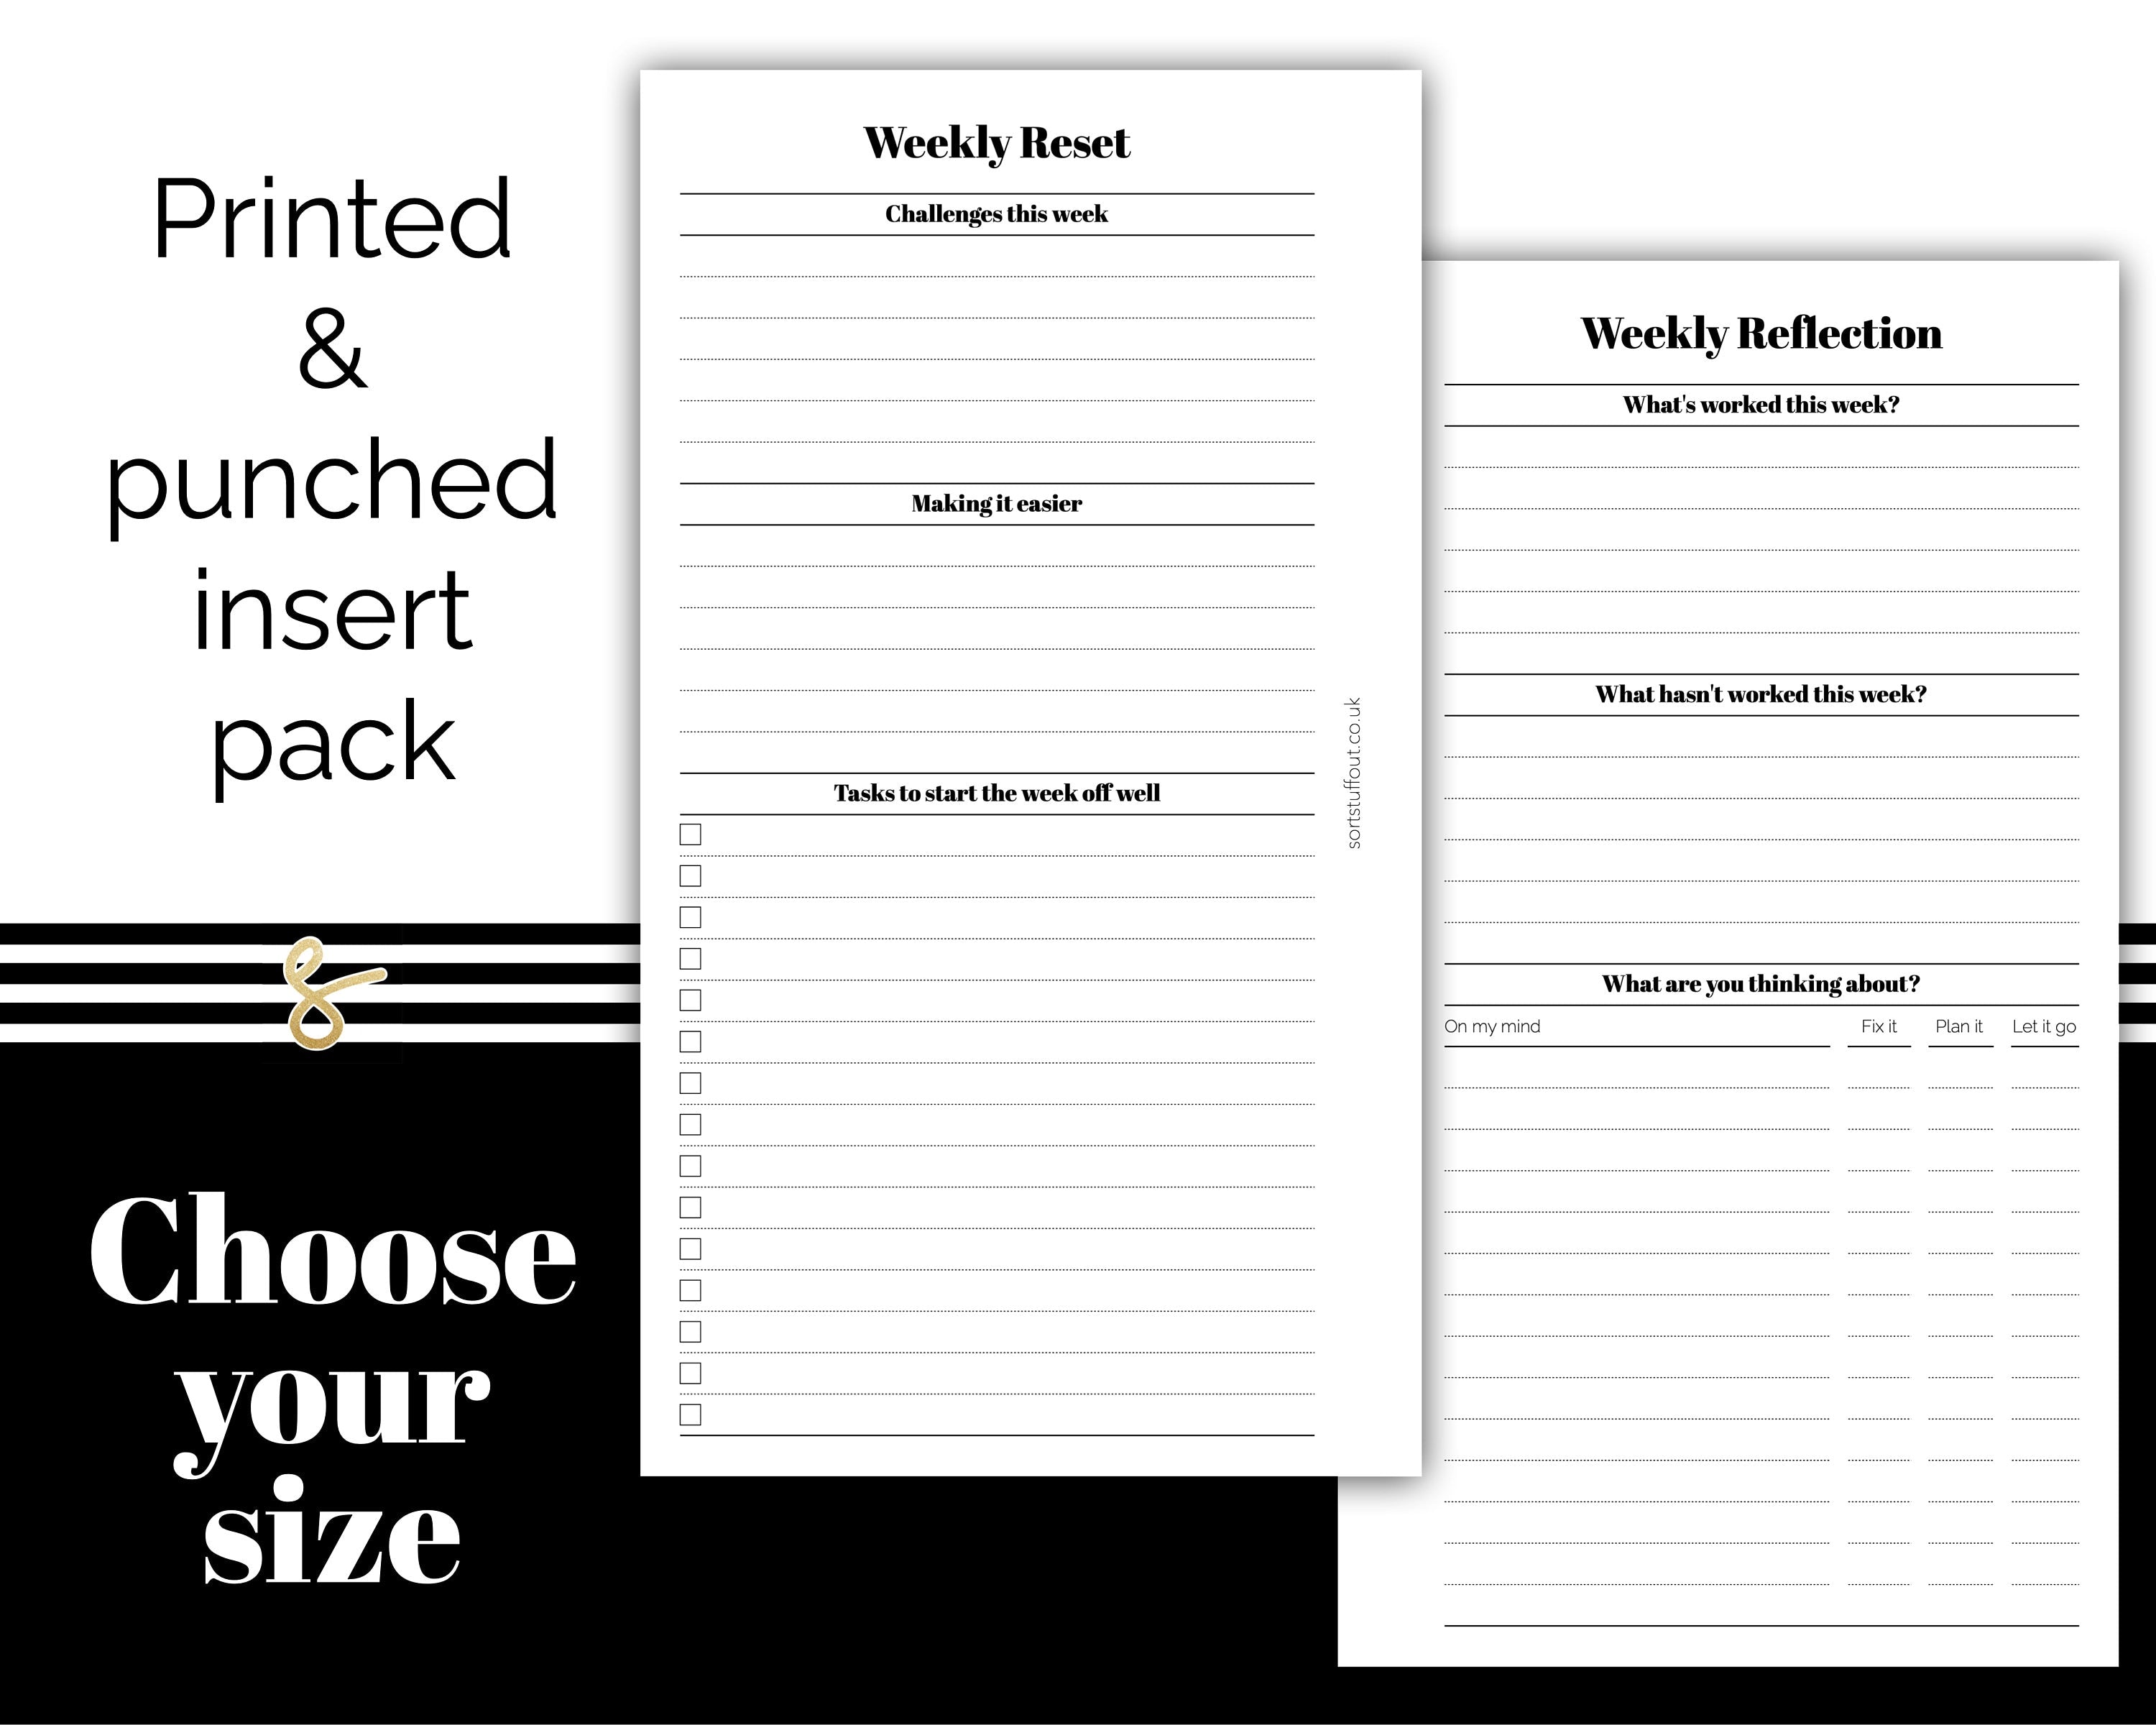 Weekly Reflect and Reset - Printed Planner Inserts